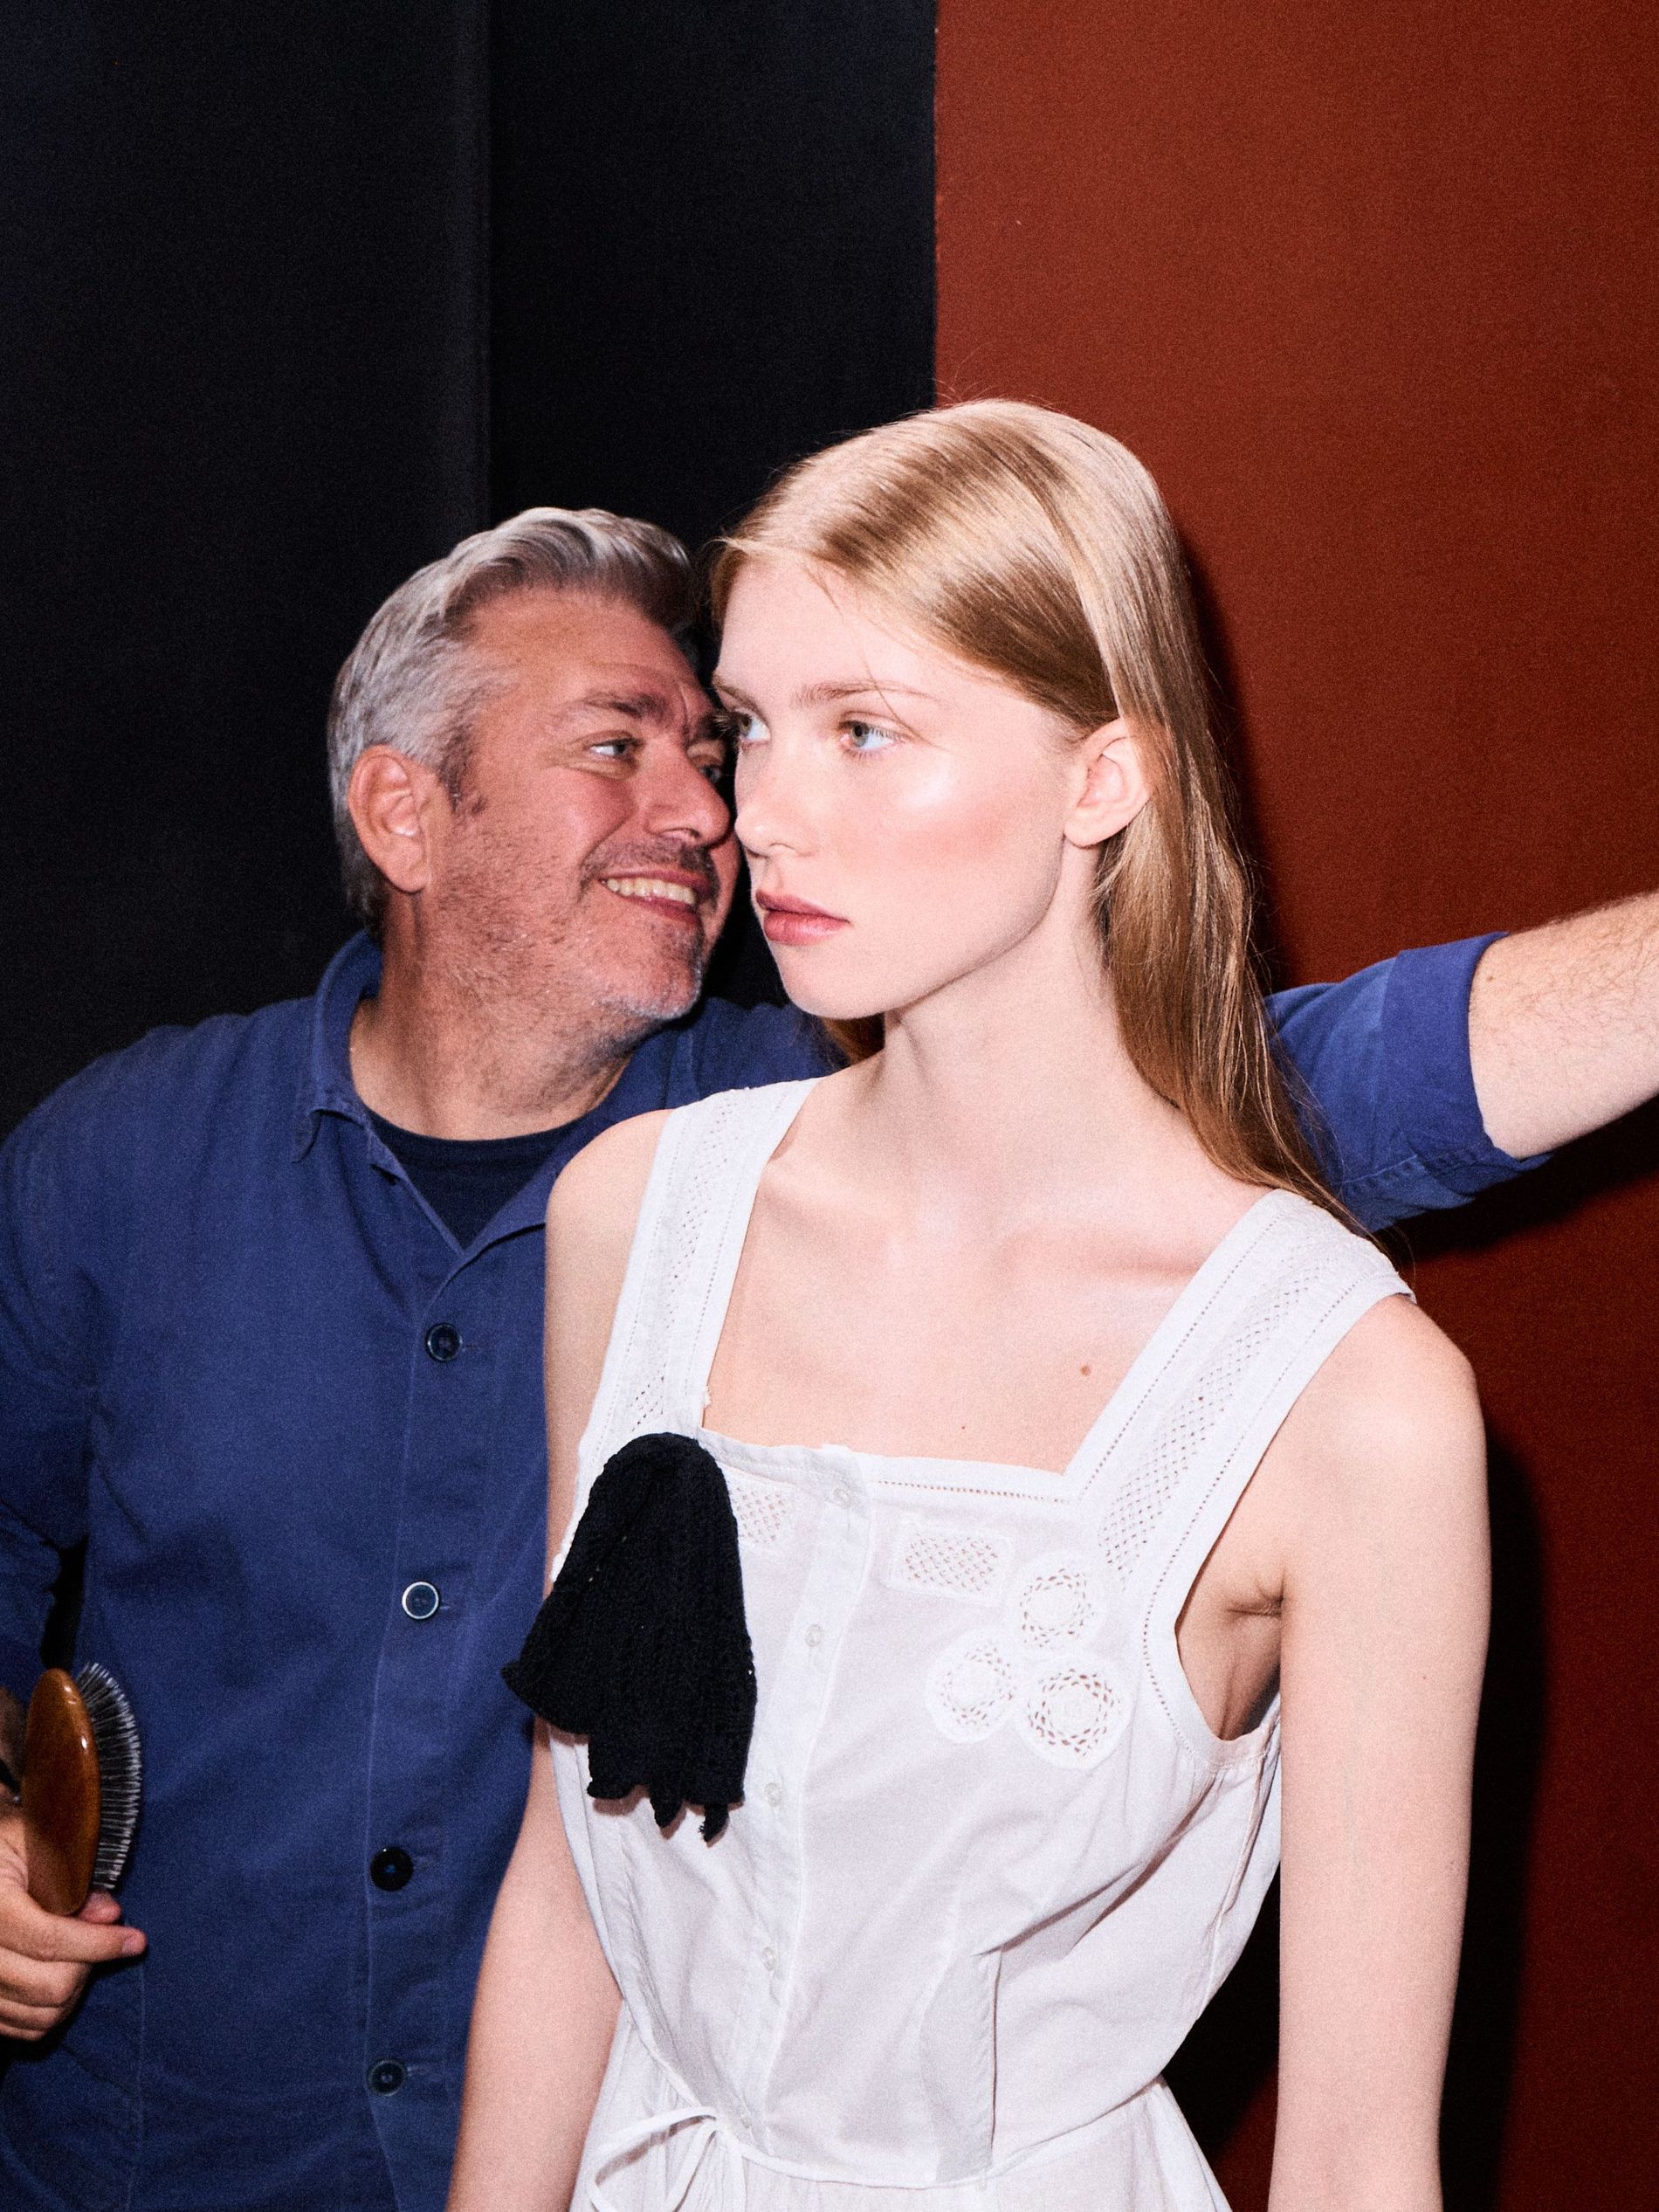 Hair stylist Cim Mahony is adjusting a model's hair before the runway